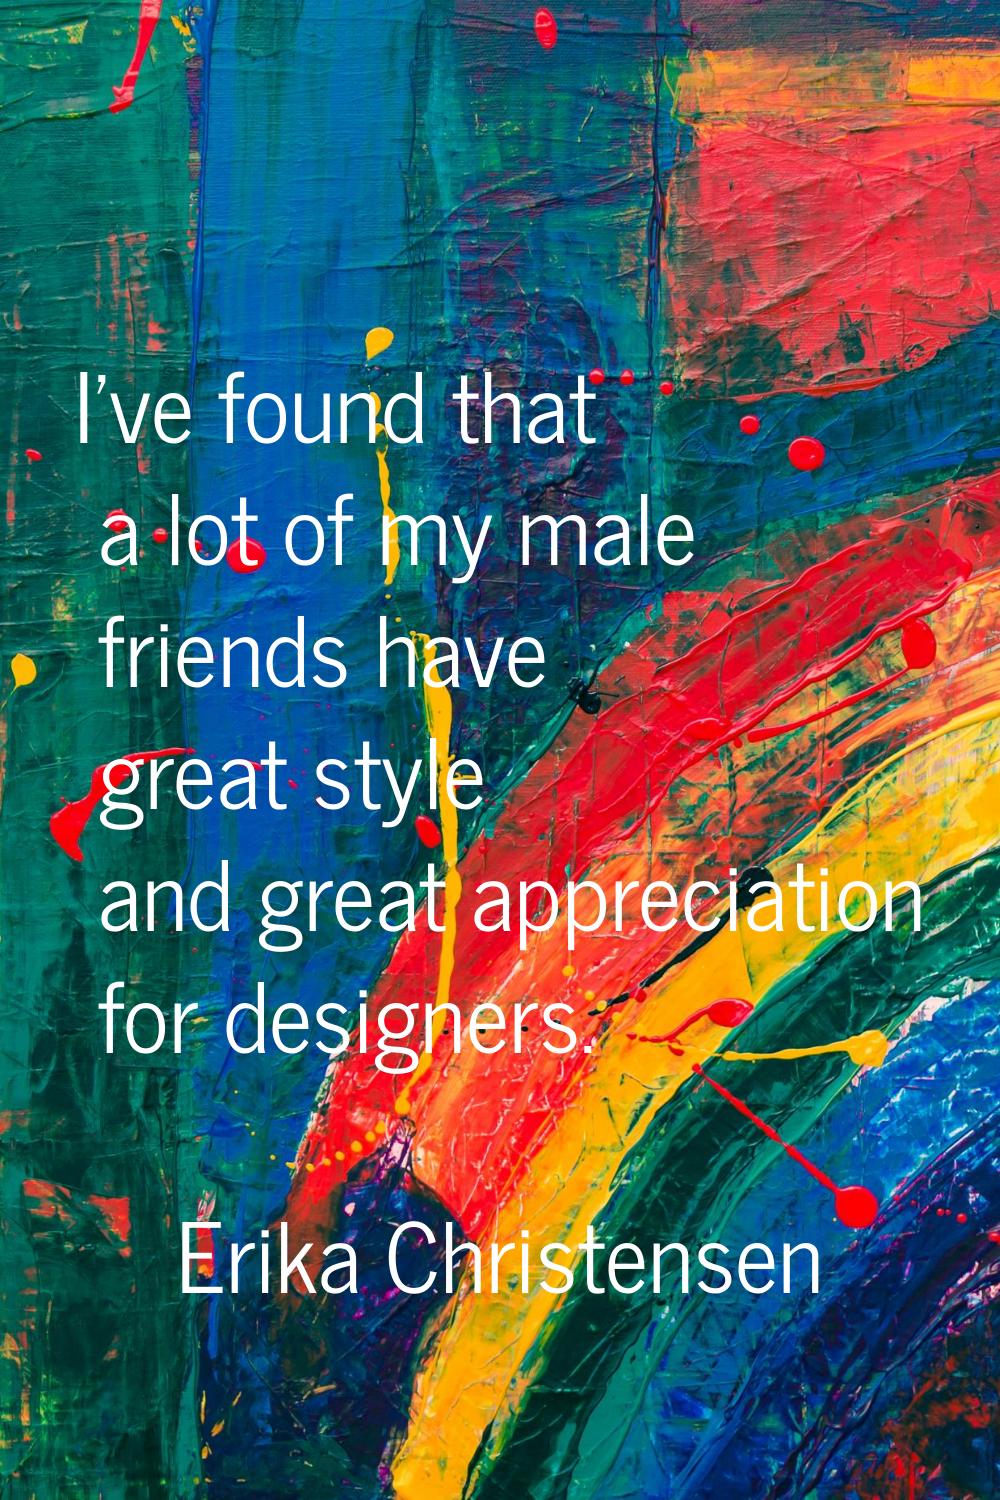 I've found that a lot of my male friends have great style and great appreciation for designers.